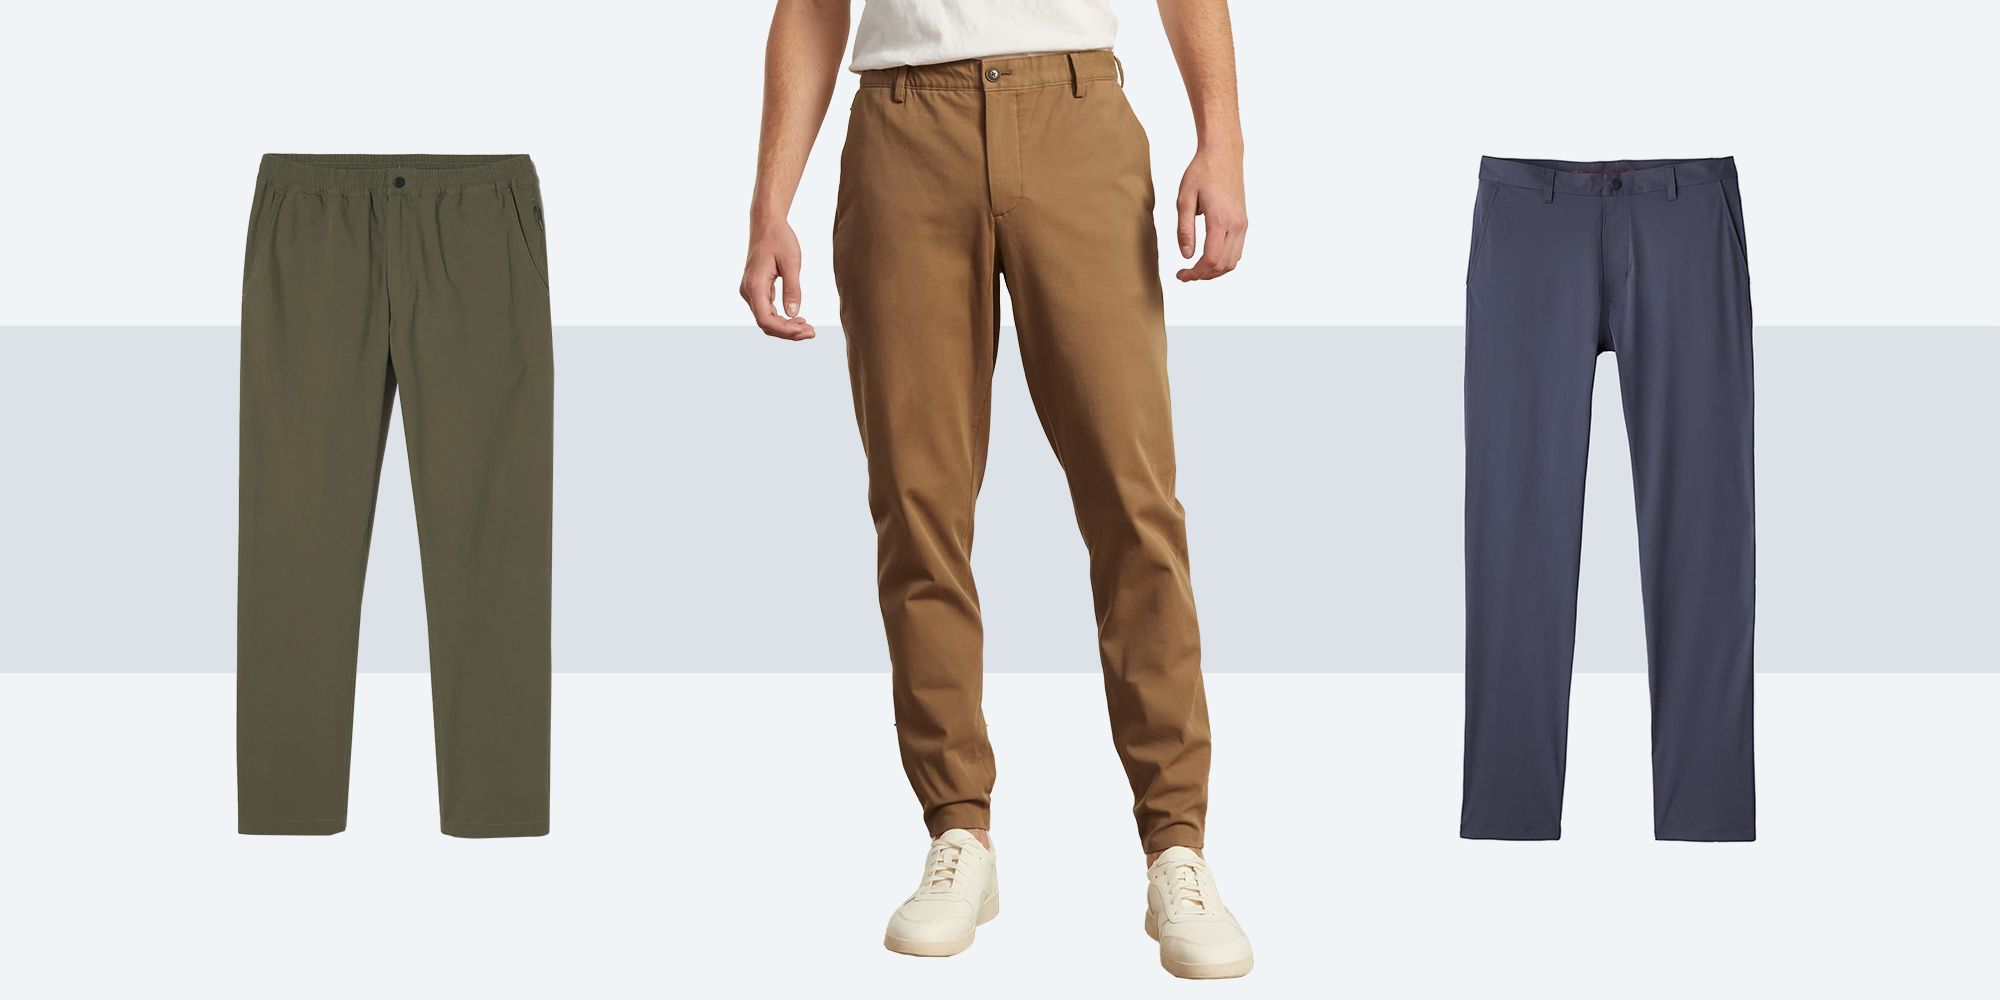 Aggregate more than 99 boss travel trousers best